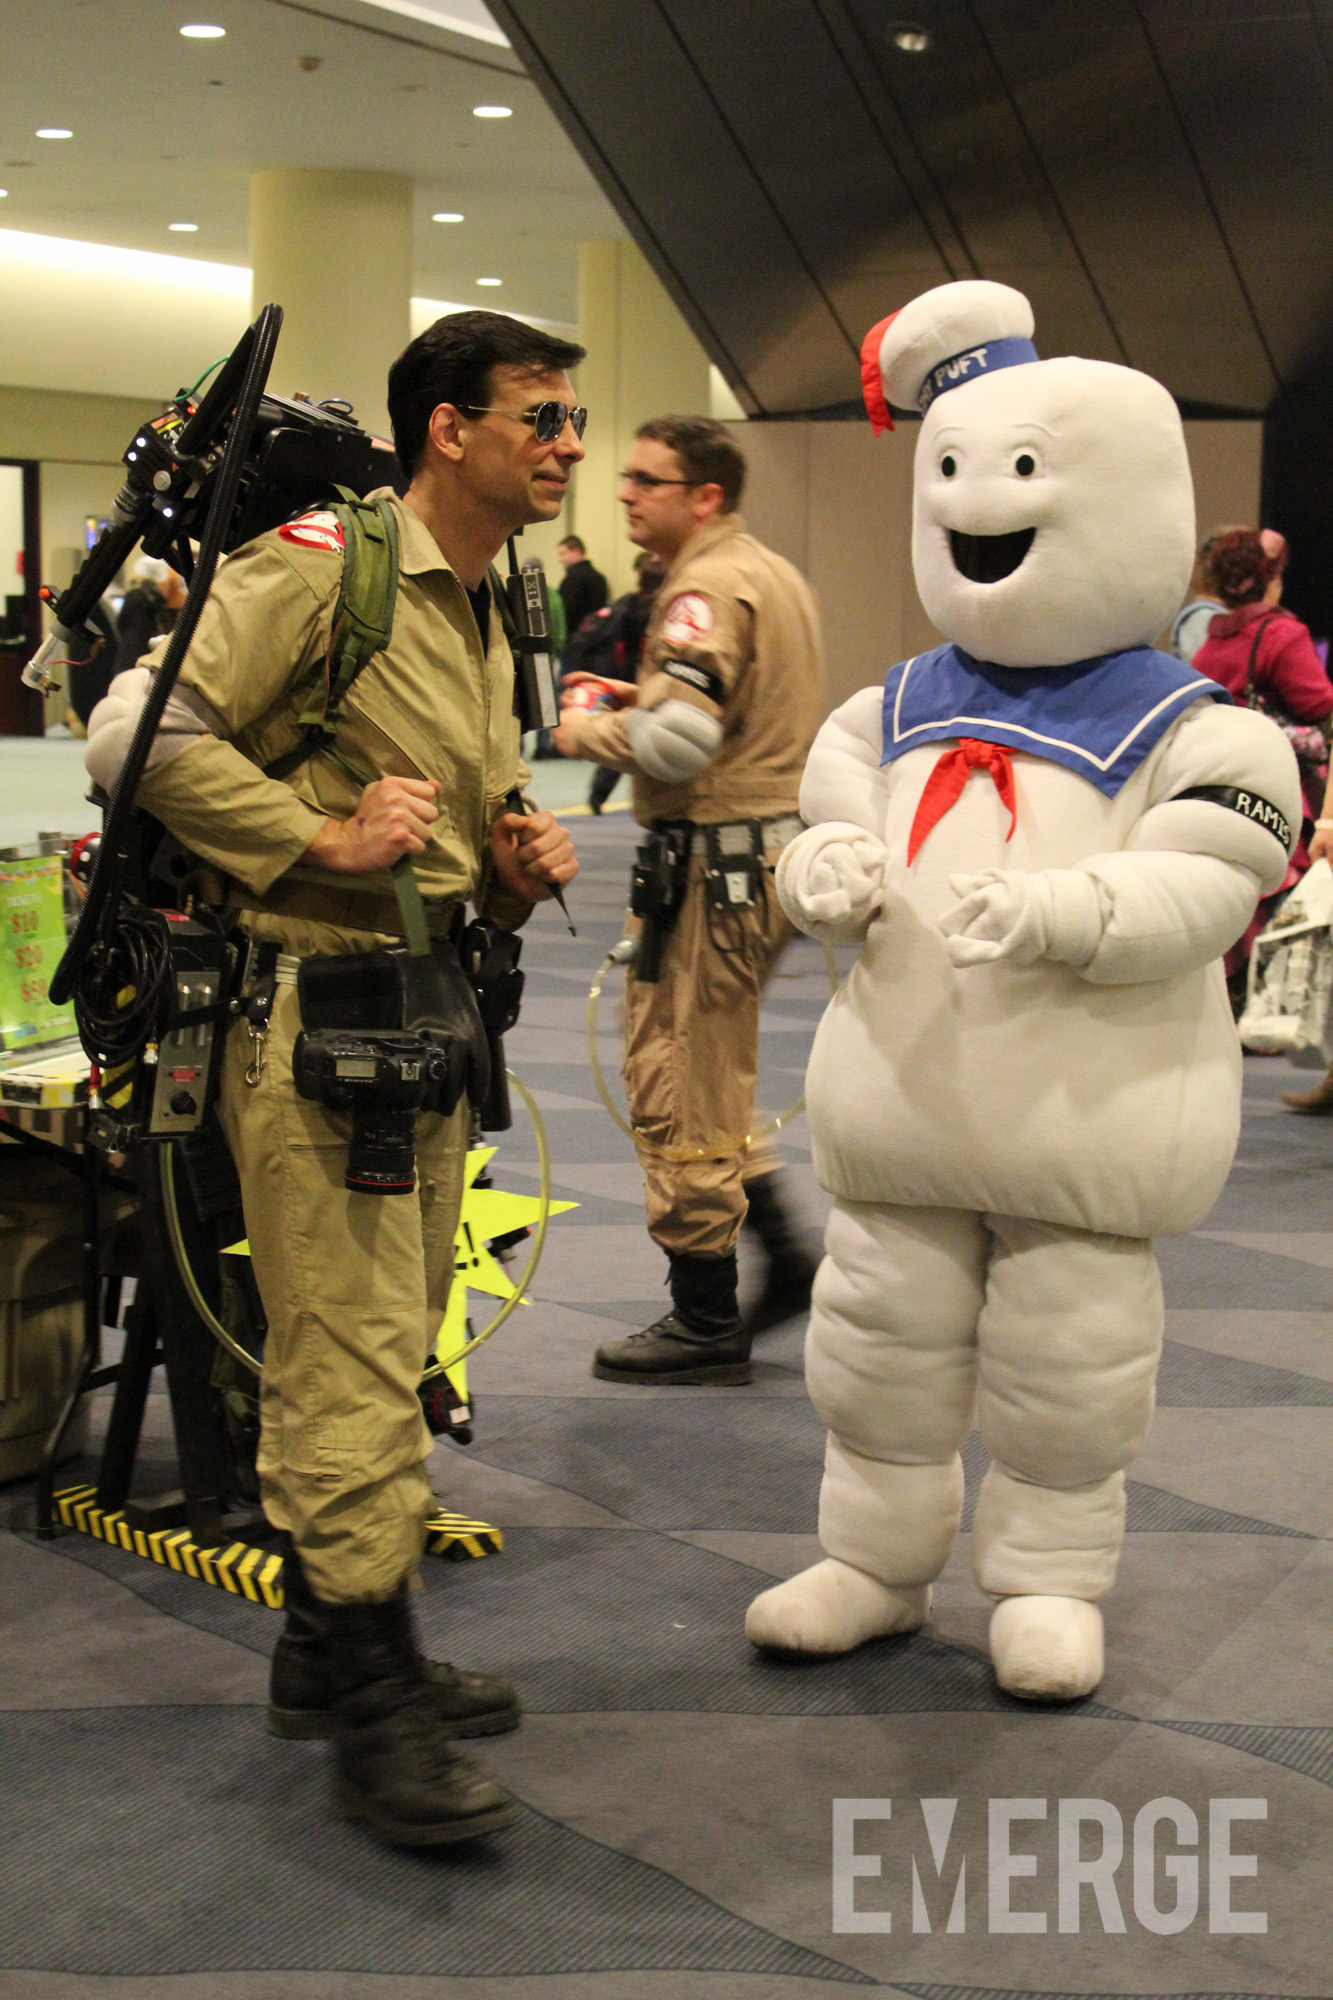 Moments before the Stay Puft Marshmallow man went on a rampage in New York, I wonder what the Ghost Busters said?